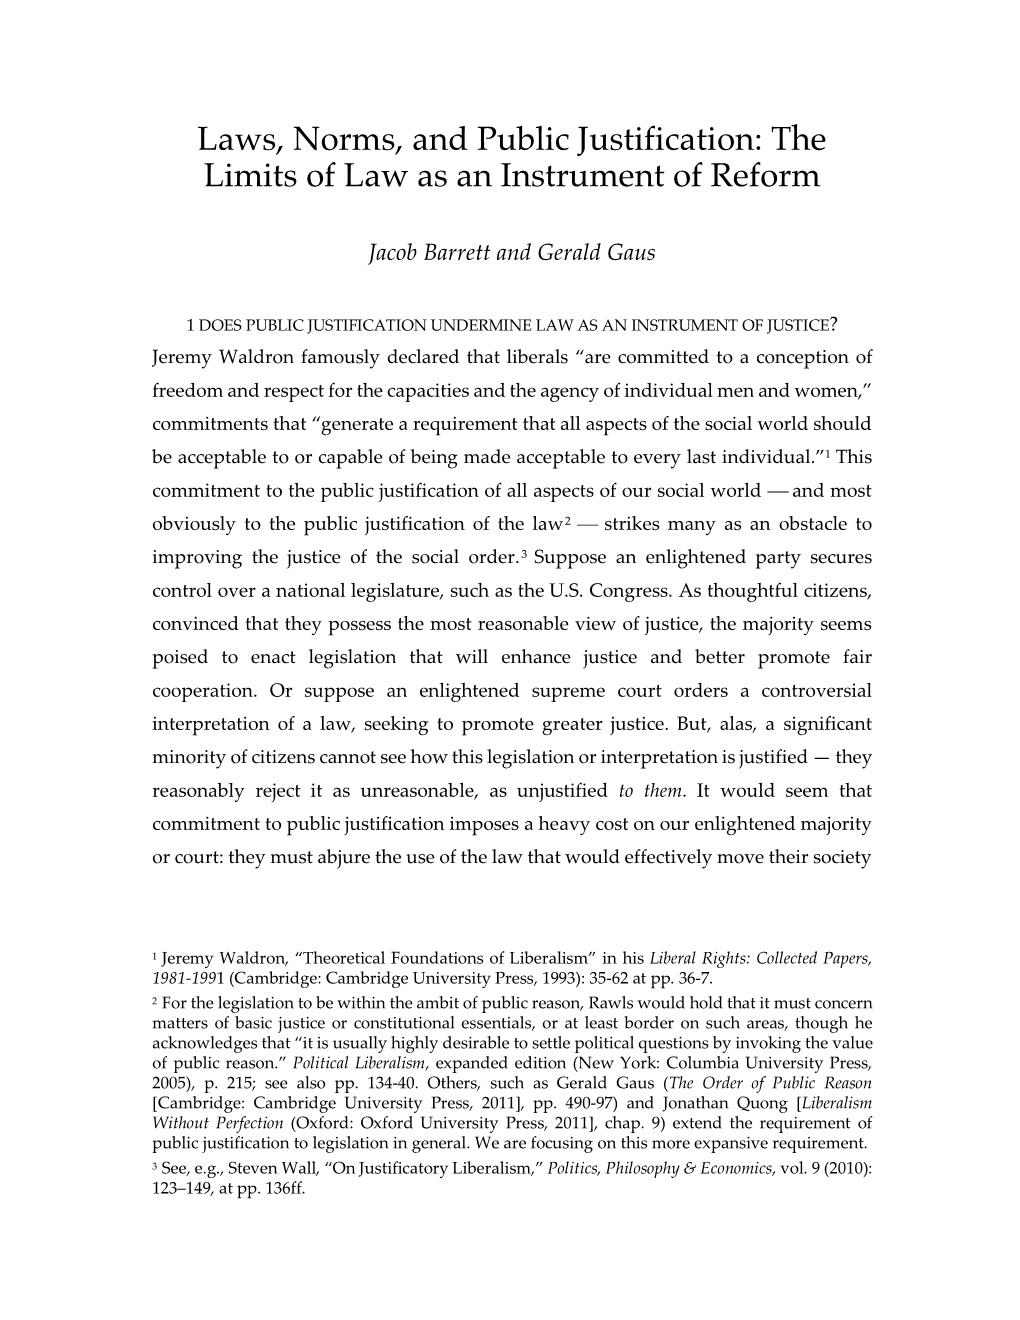 Laws, Norms, and Public Justification: the Limits of Law As an Instrument of Reform